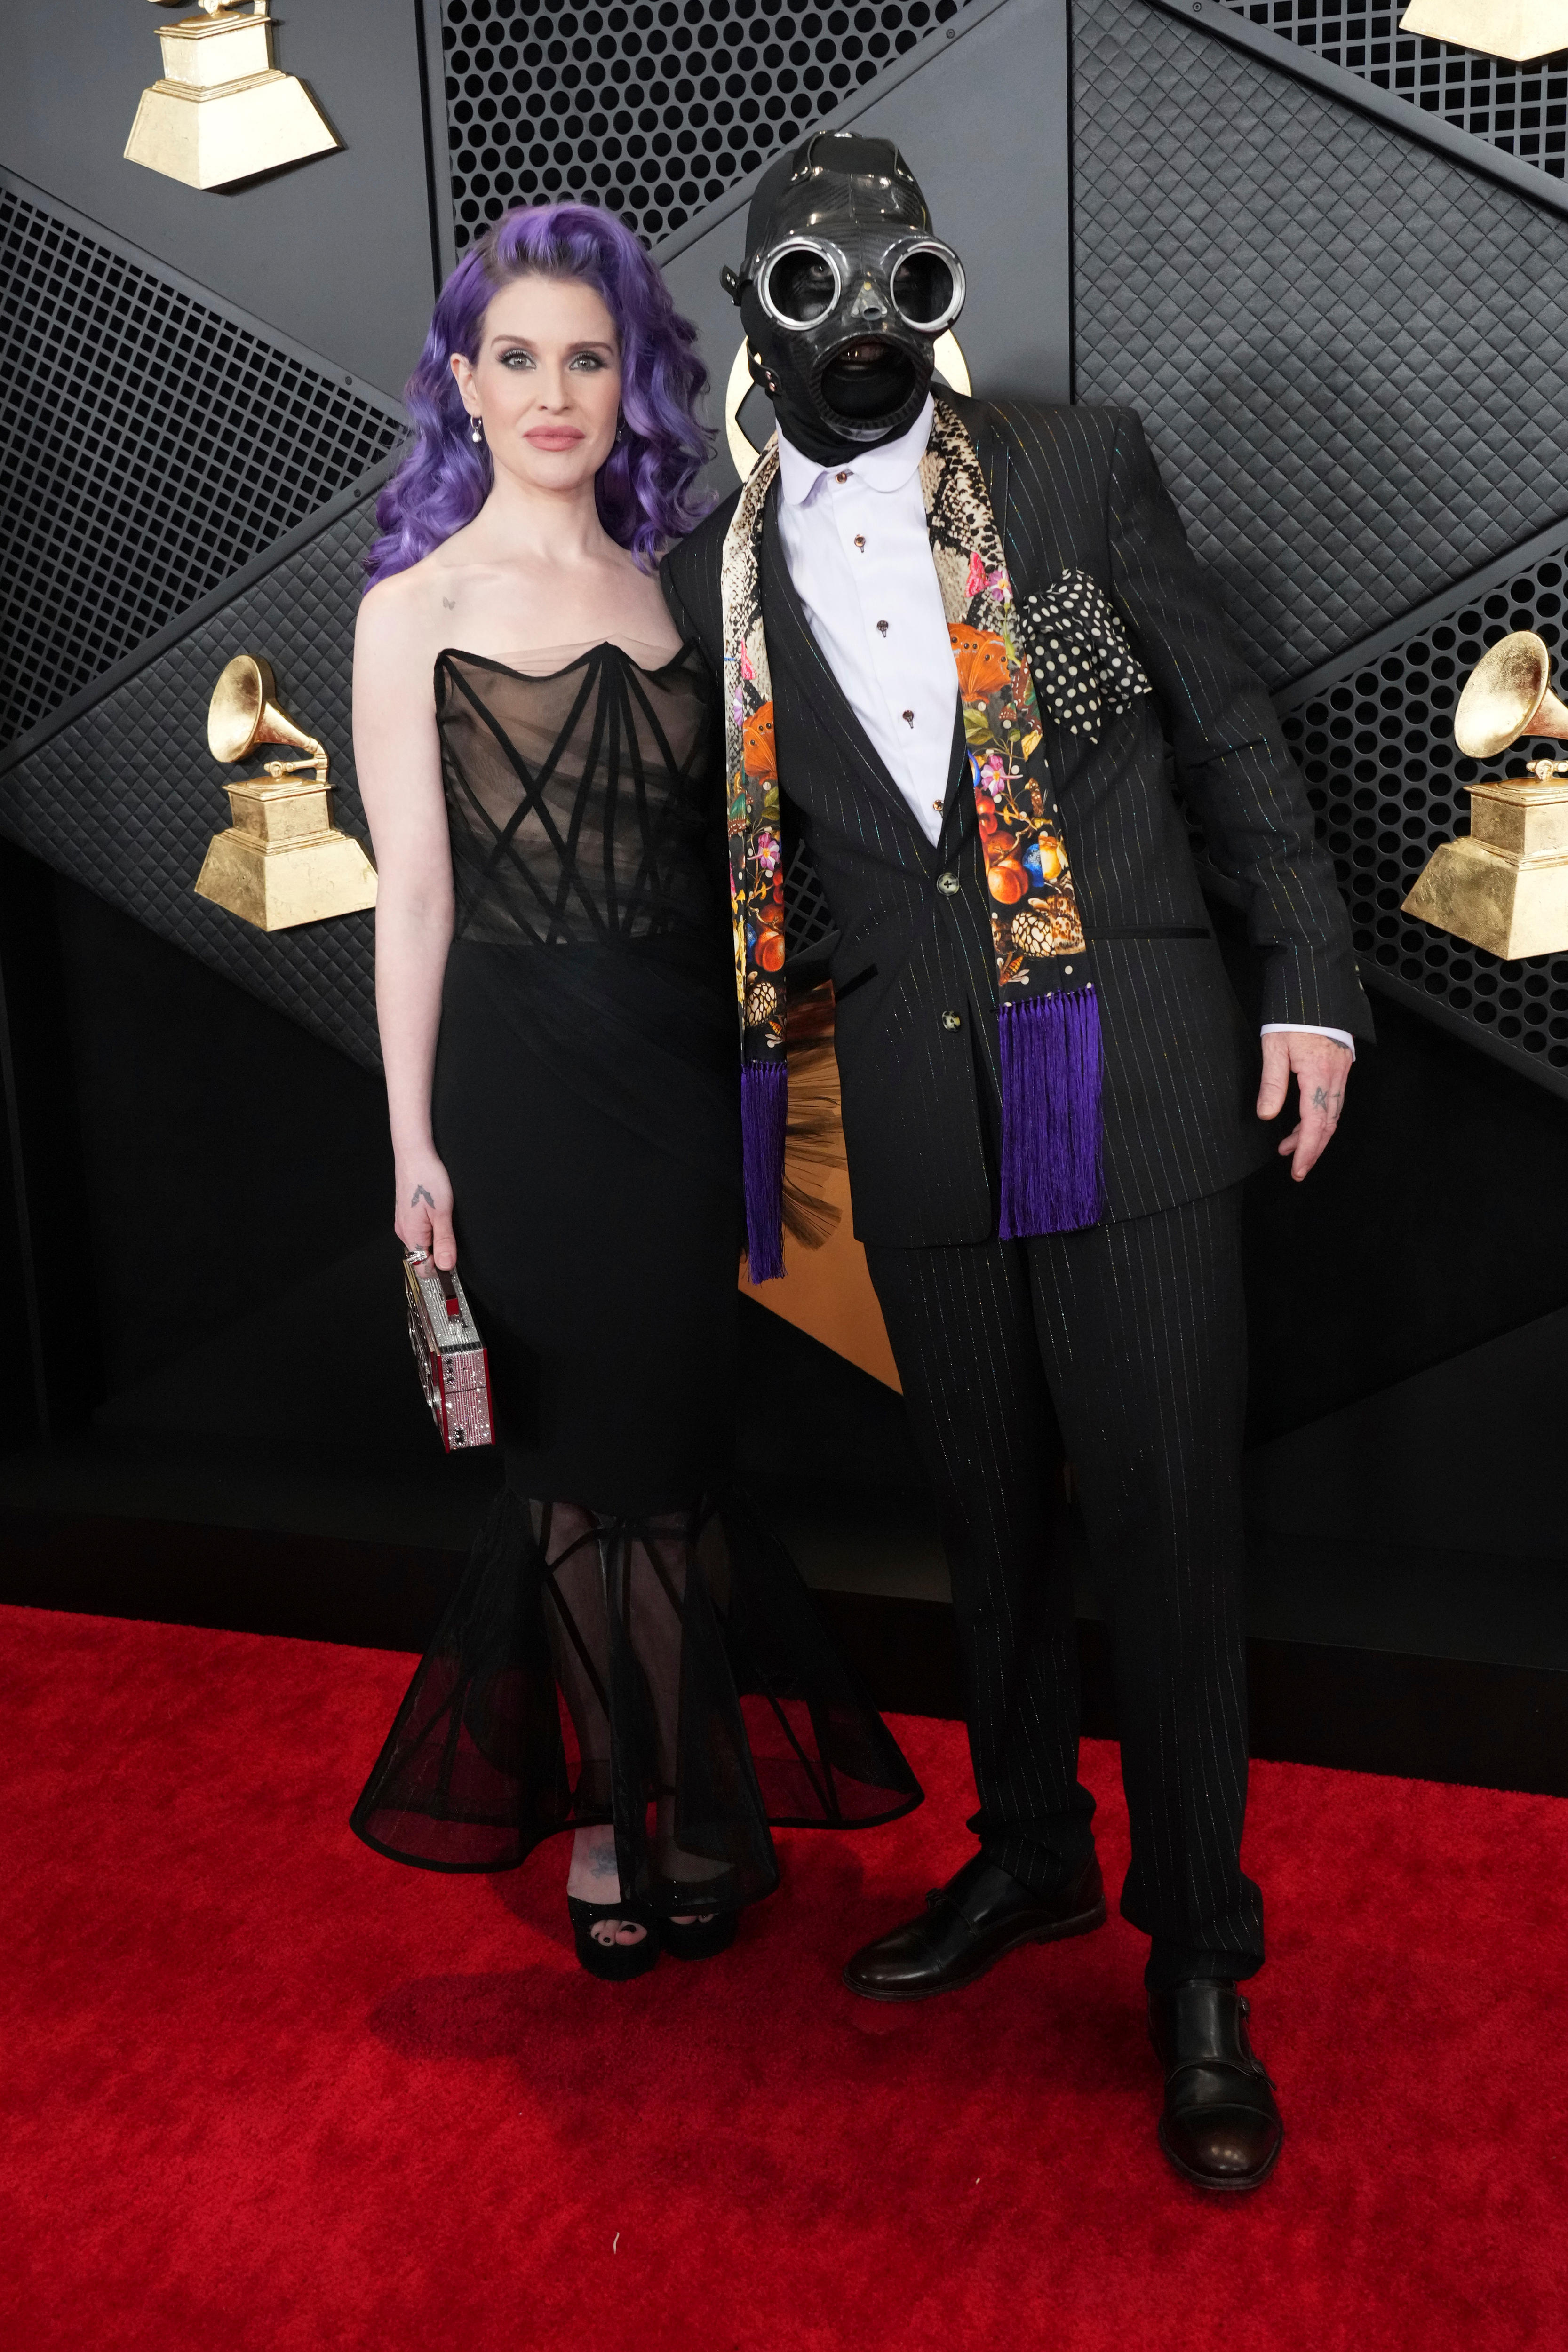 Kelly Osbourne in a strapless black dress with purple hair and Sid Wilson wearing a full-face leather mask with googles